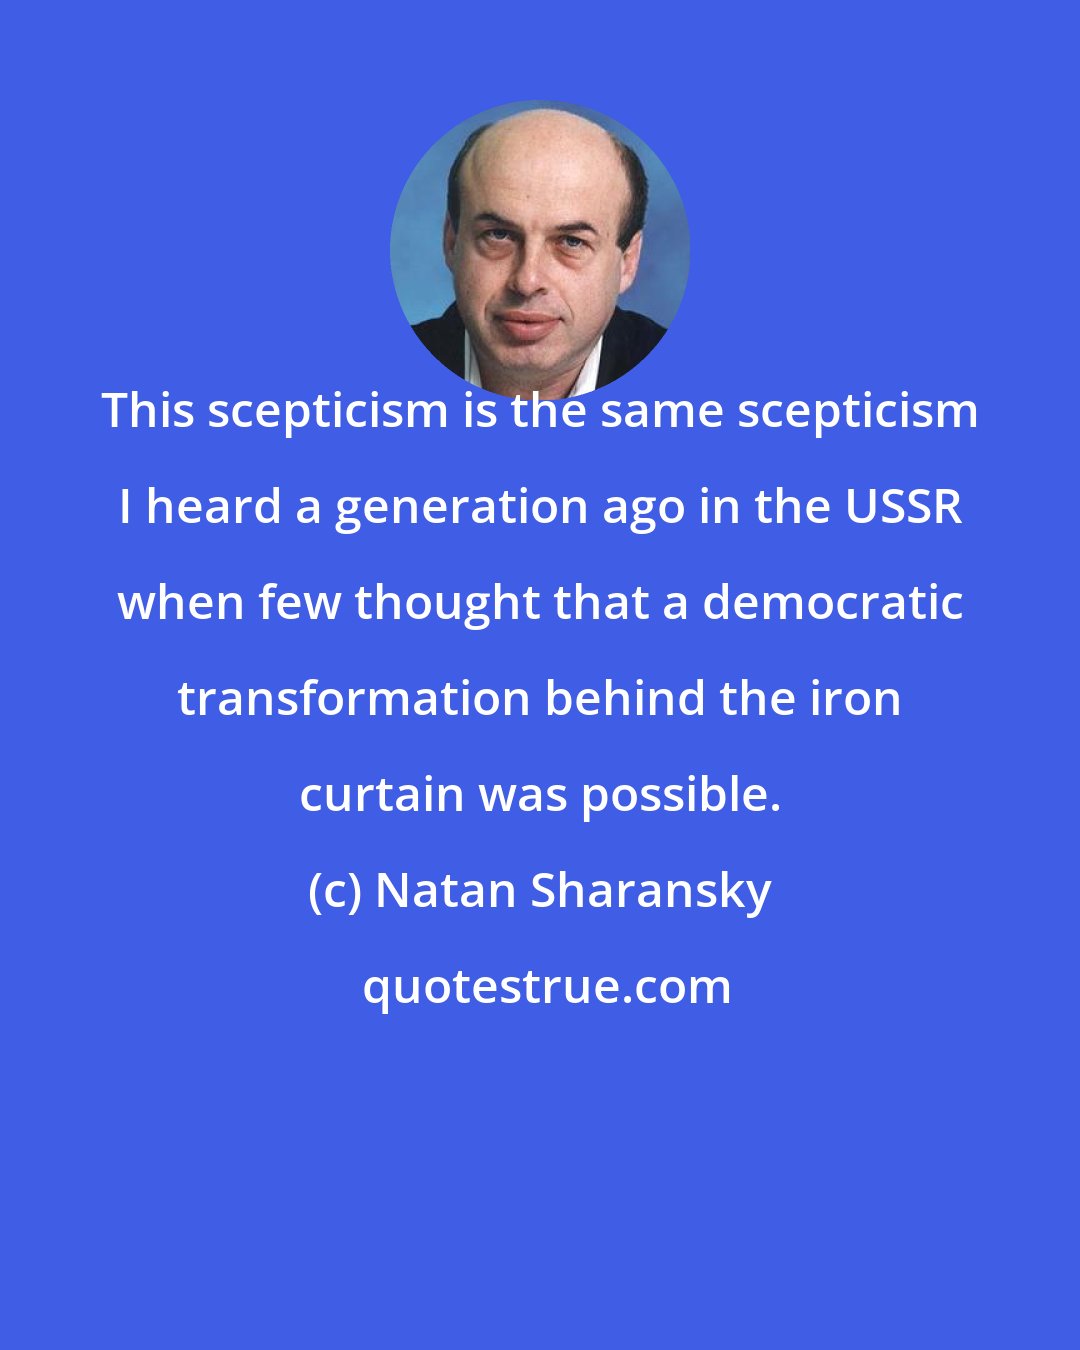 Natan Sharansky: This scepticism is the same scepticism I heard a generation ago in the USSR when few thought that a democratic transformation behind the iron curtain was possible.